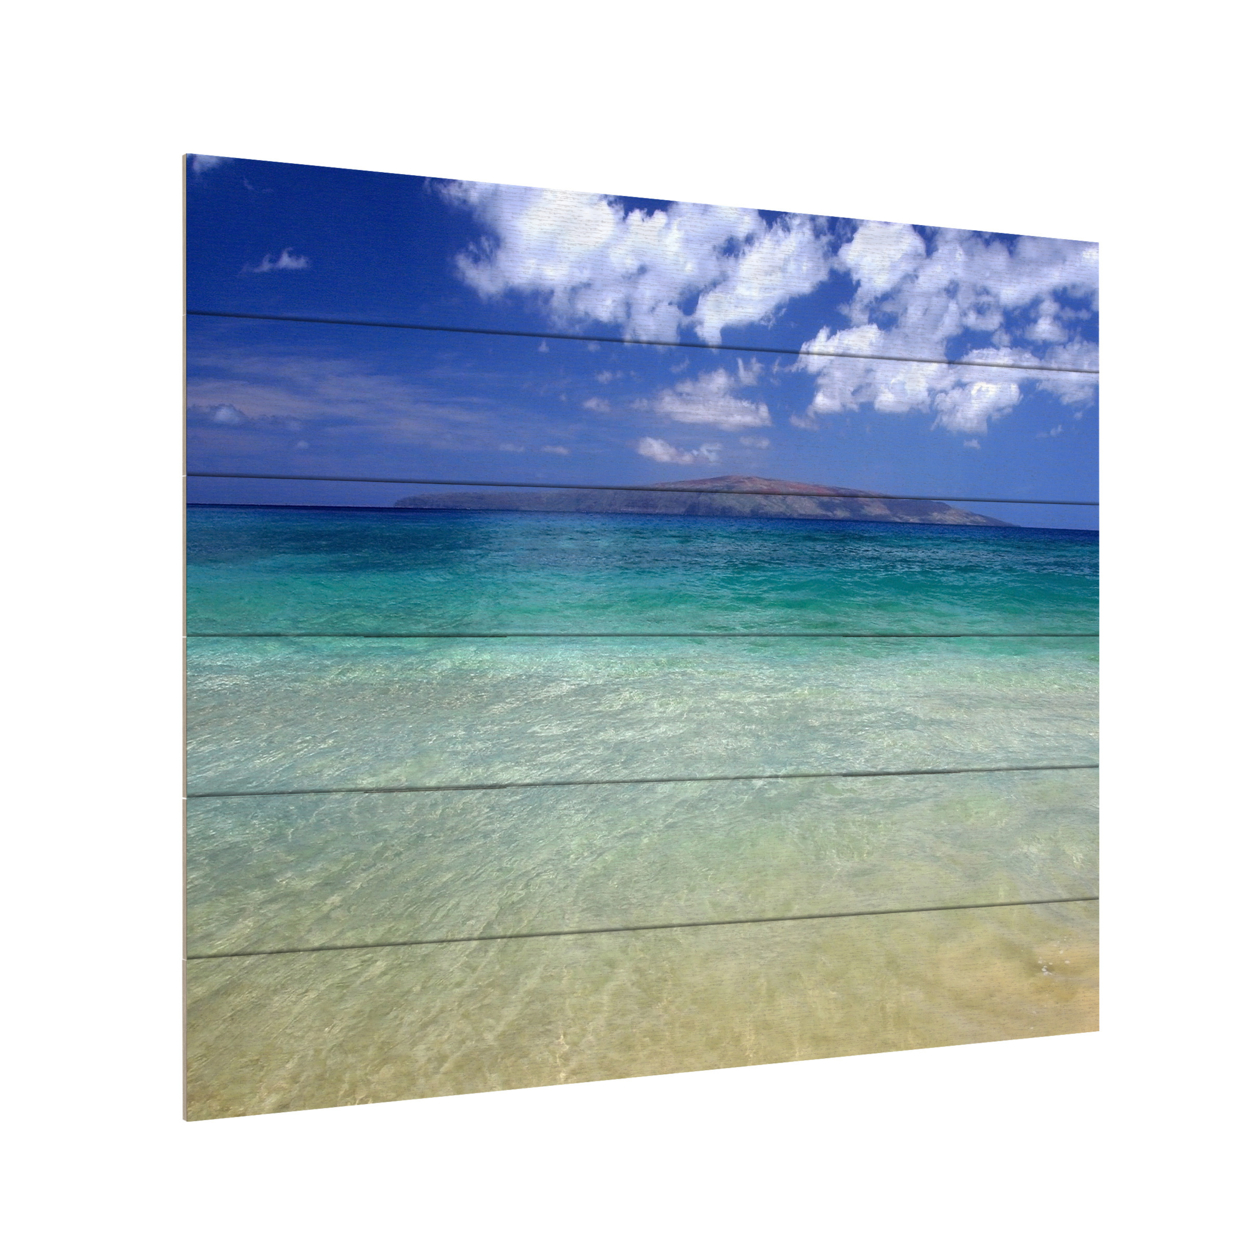 Wooden Slat Art 18 X 22 Inches Titled Hawaii Blue Beach Ready To Hang Home Decor Picture